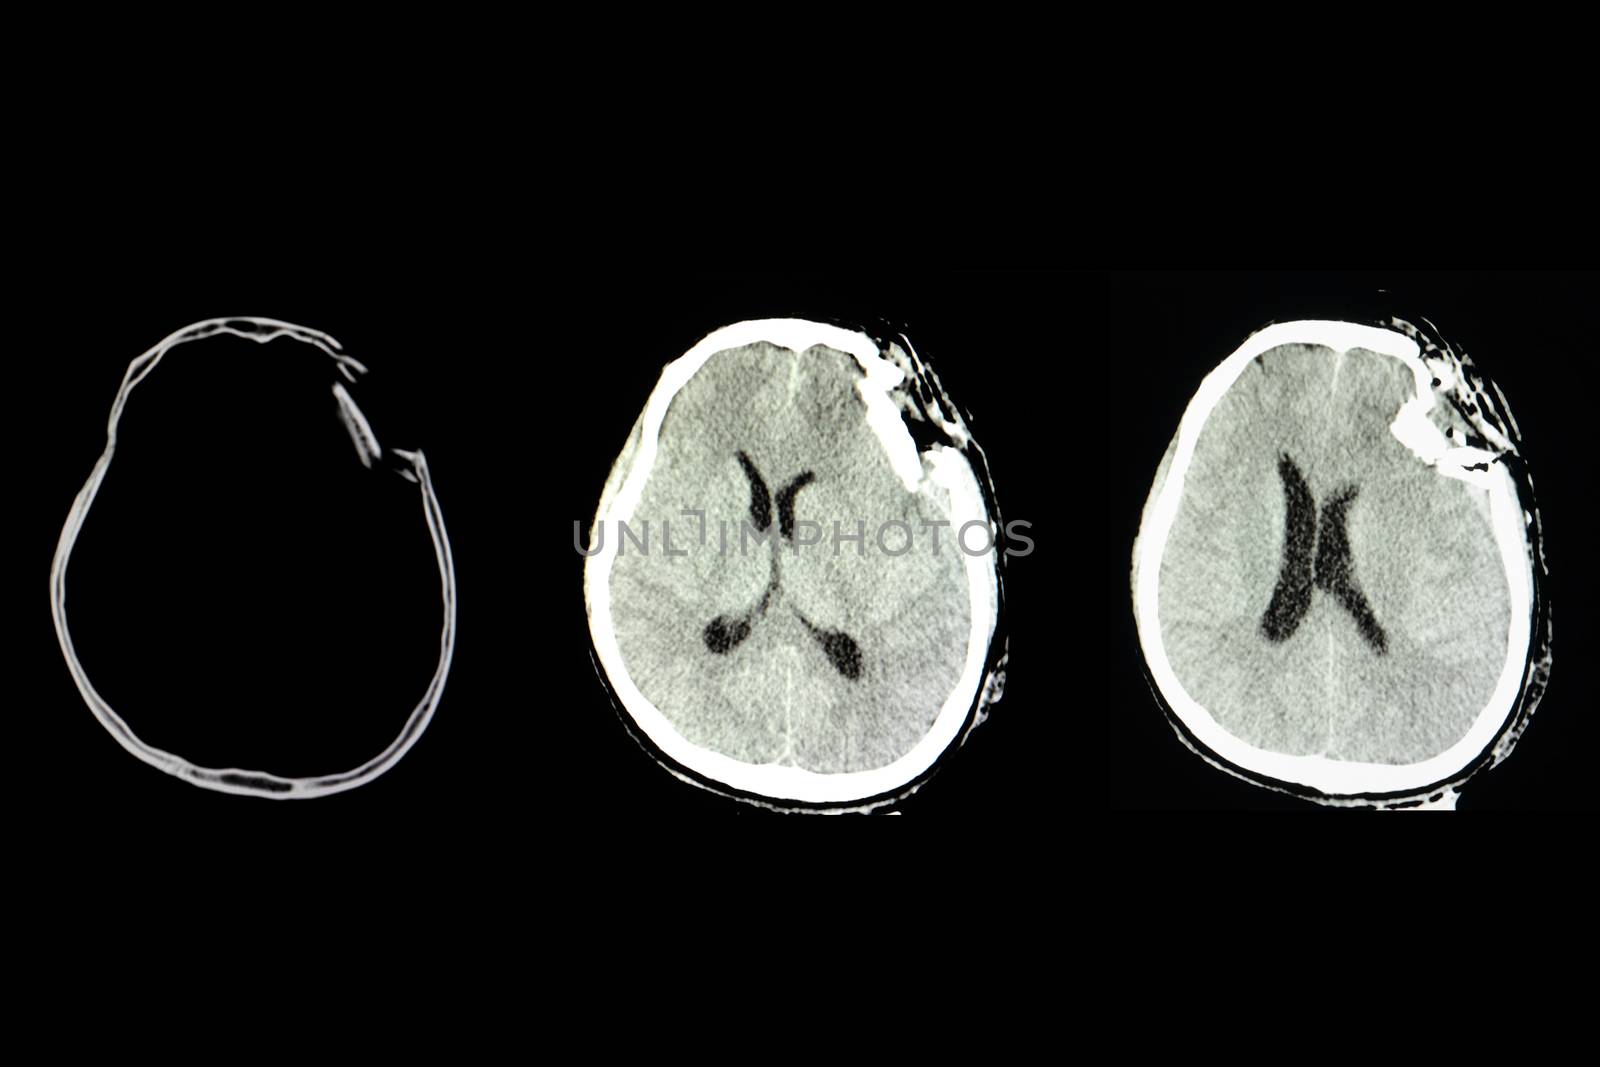 CT scan of a patient with traumatic brain injury showing depression skull fracture in the frontotemporol region with brain edema